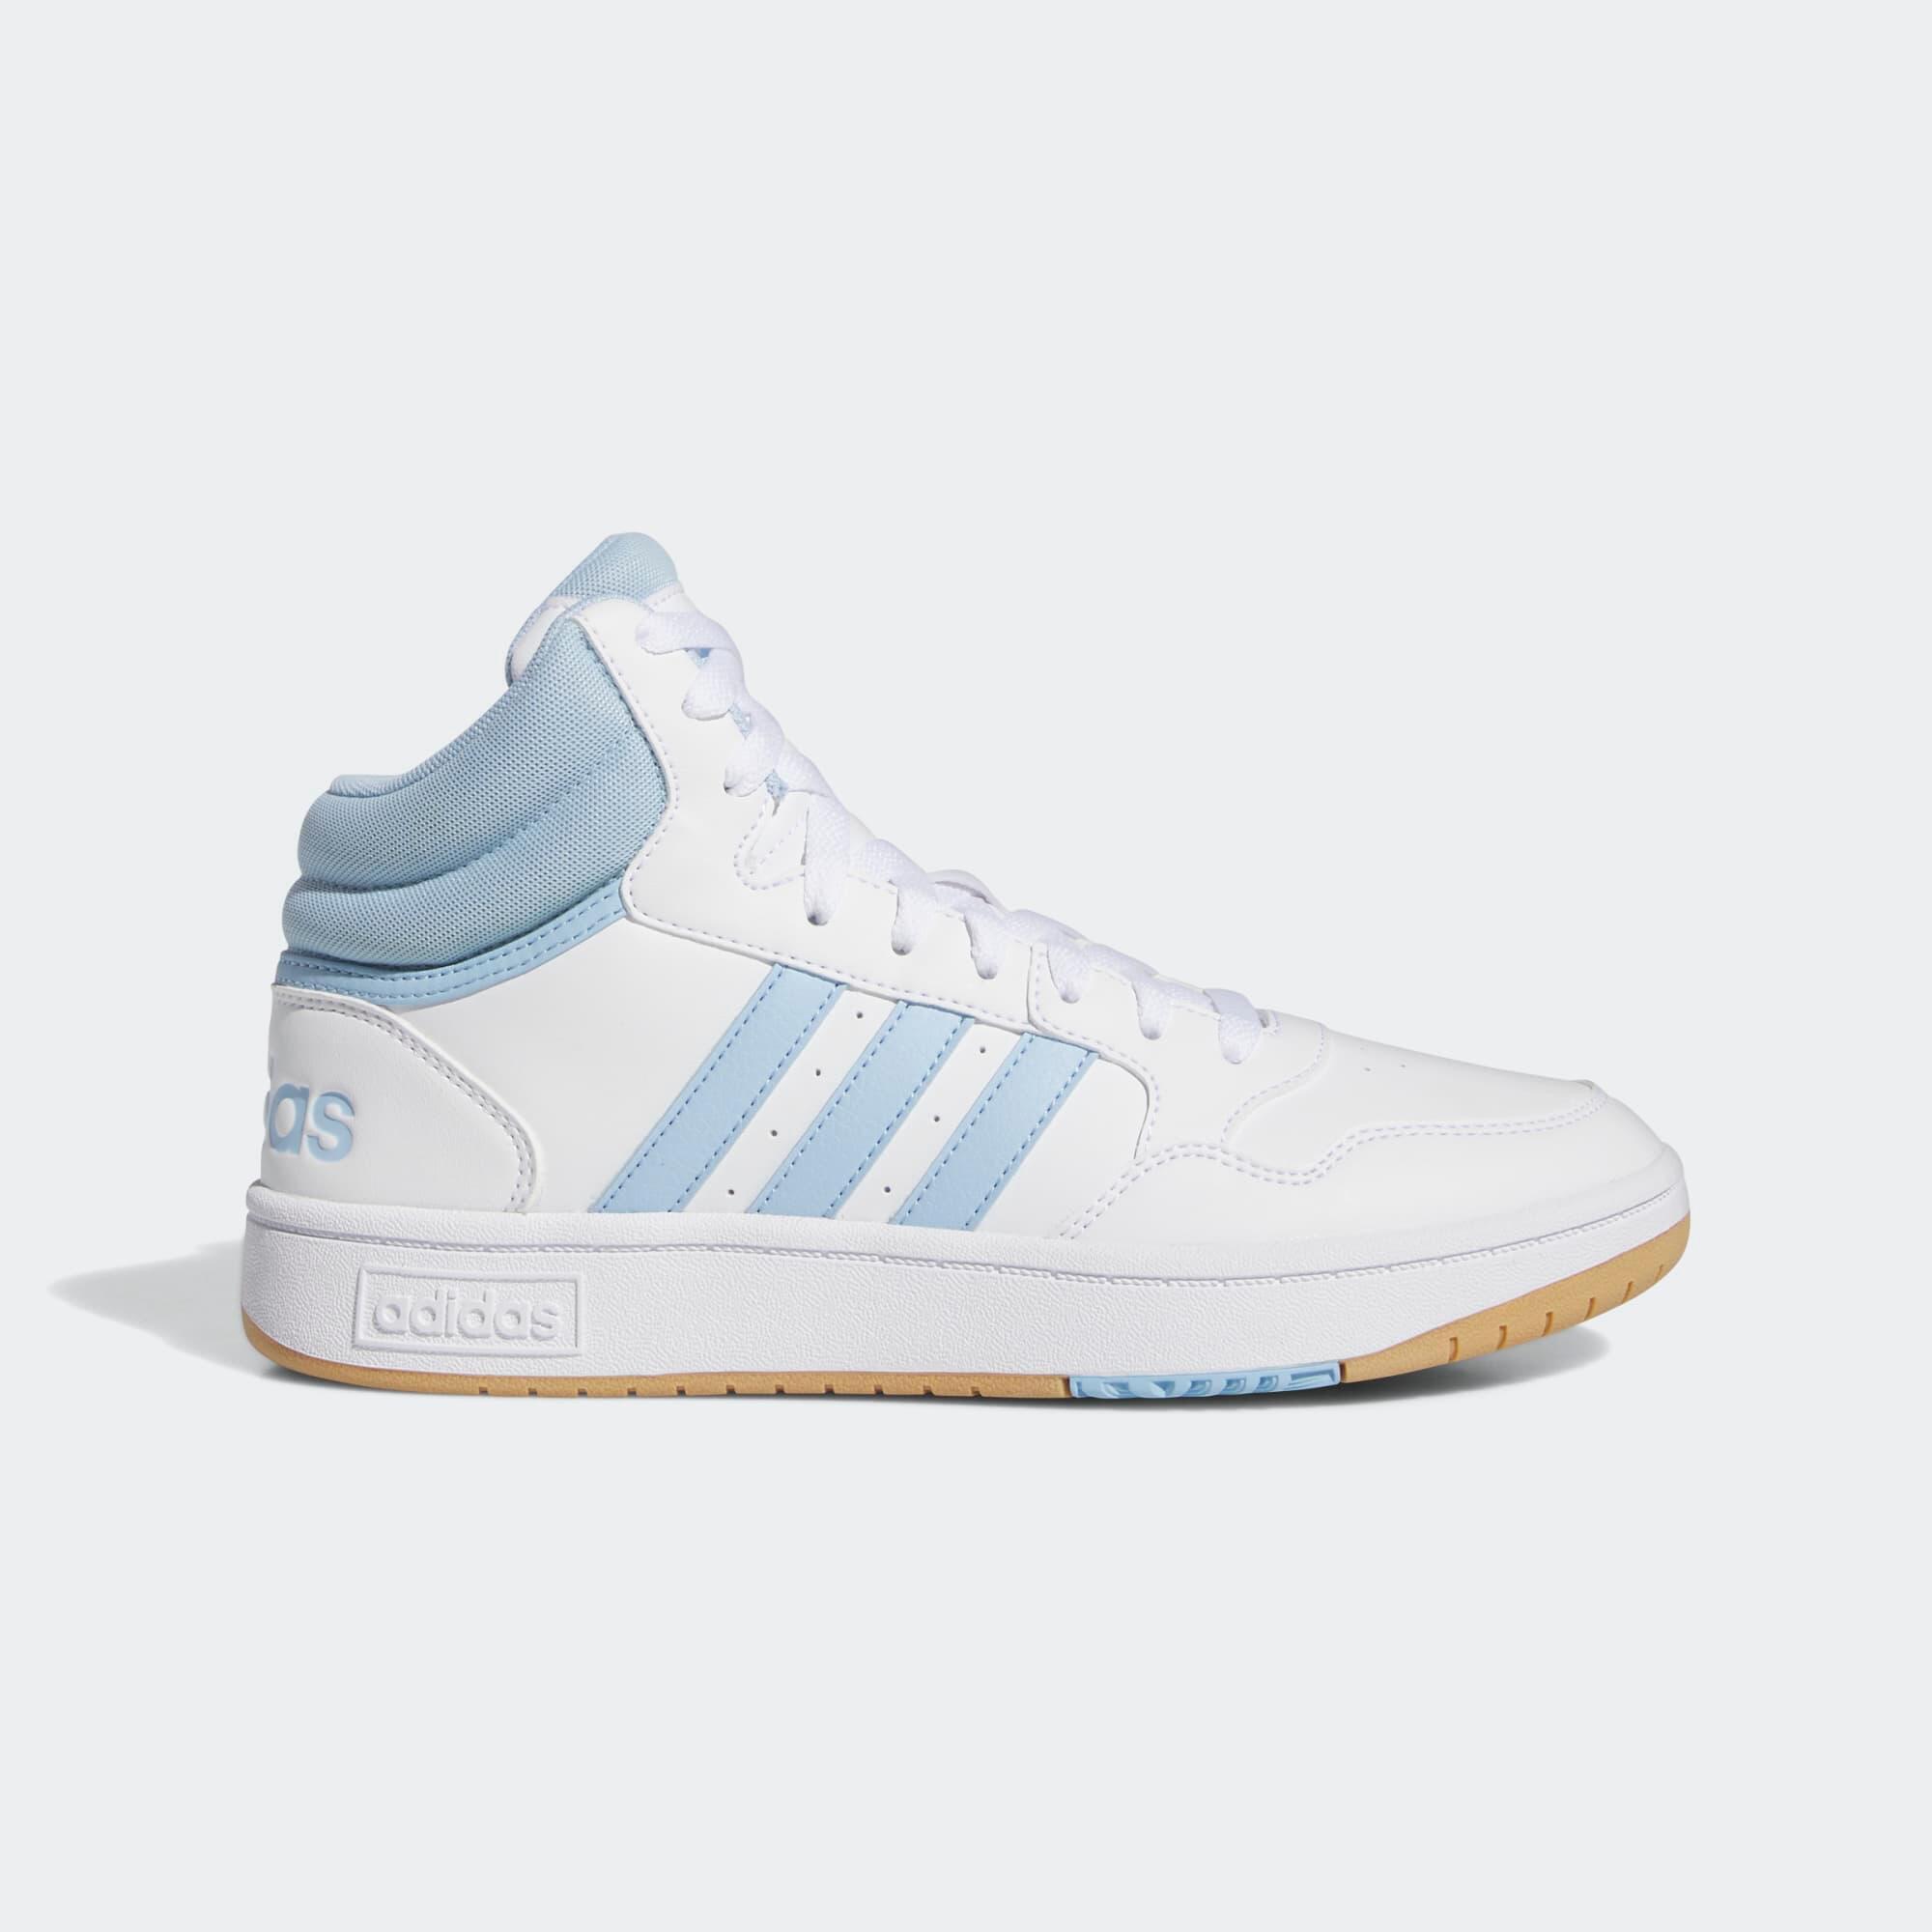 REFURBISHED WOMENS ADIDAS MID HOOPS 3.0 SHOES - WHITE - A GRADE 4/7